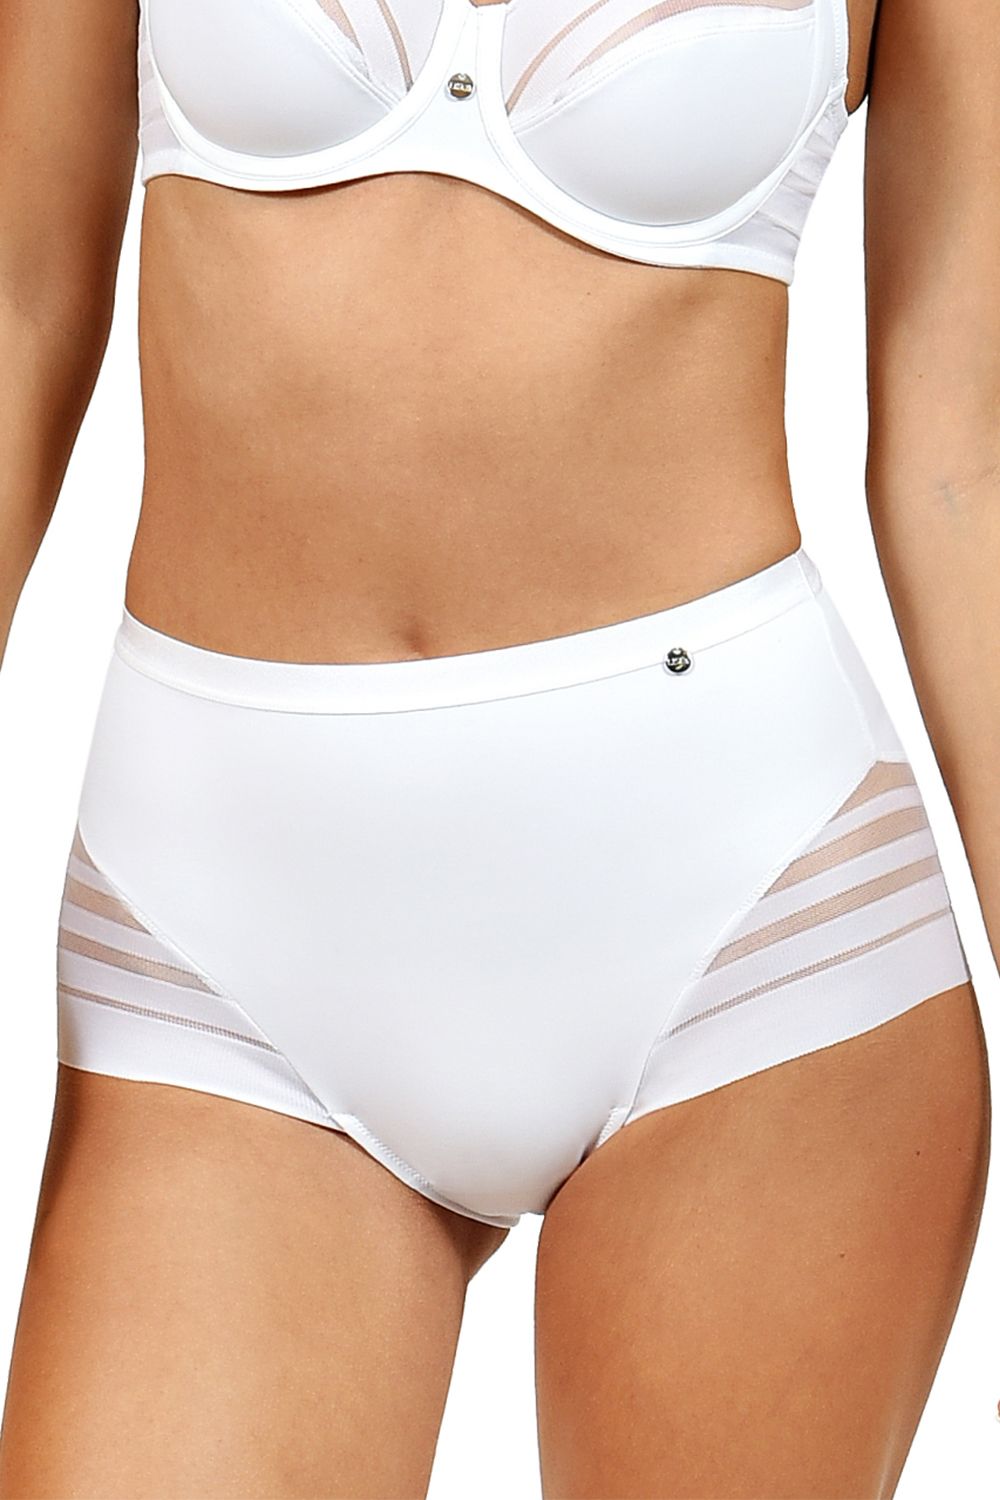 These fashionable 'Alegra' high waisted briefs from Lisca have seamless edges for a smooth look under tight clothes, and feature seductive transparent details. The front is lined with functional tulle to shape your figure. The briefs are soft and comfortable, thanks to the wide elastic piping in the waist, which prevents unnecessary cutting into skin.